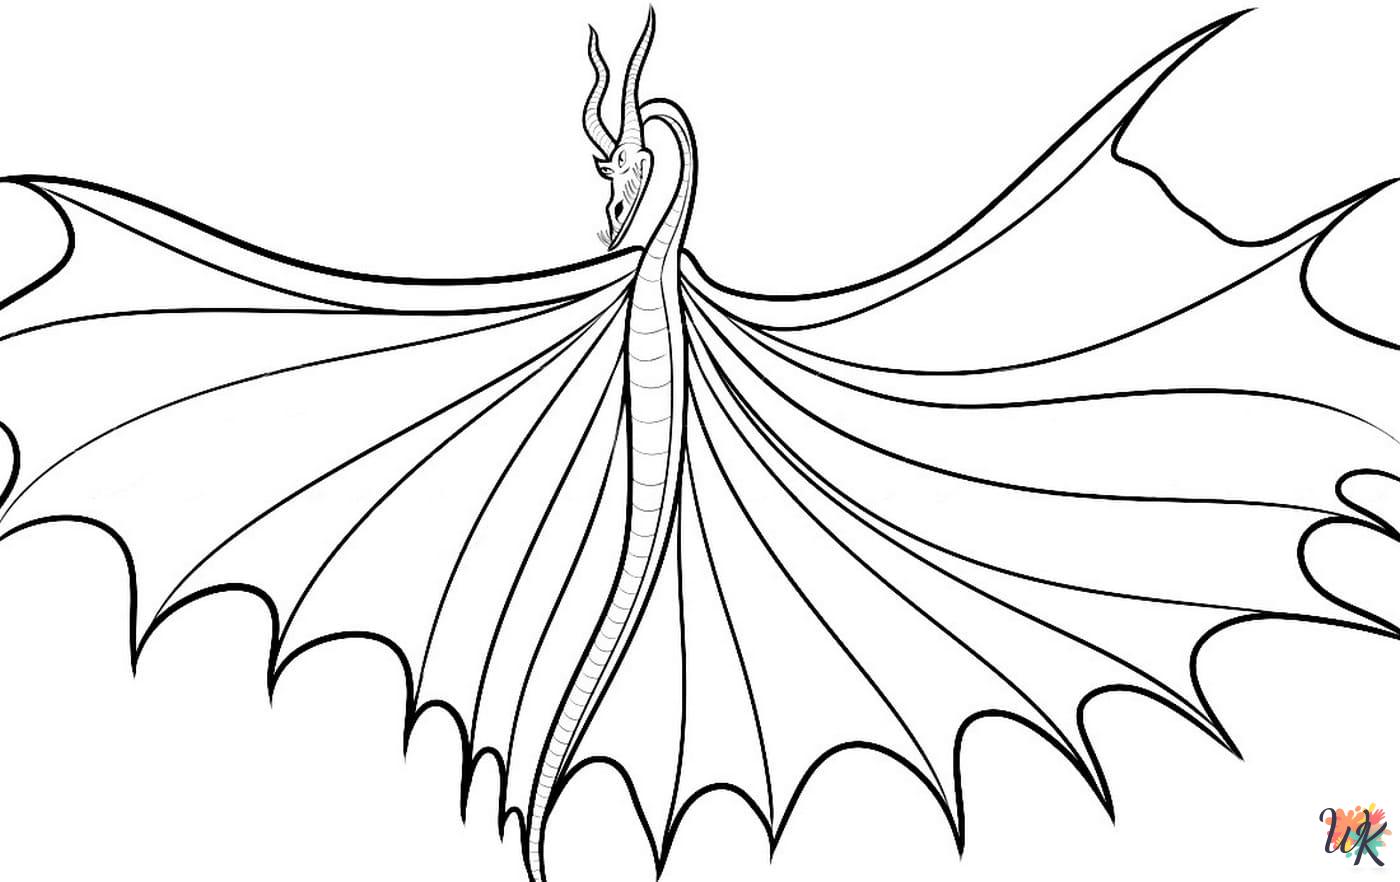 How To Train Your Dragon free coloring pages 3